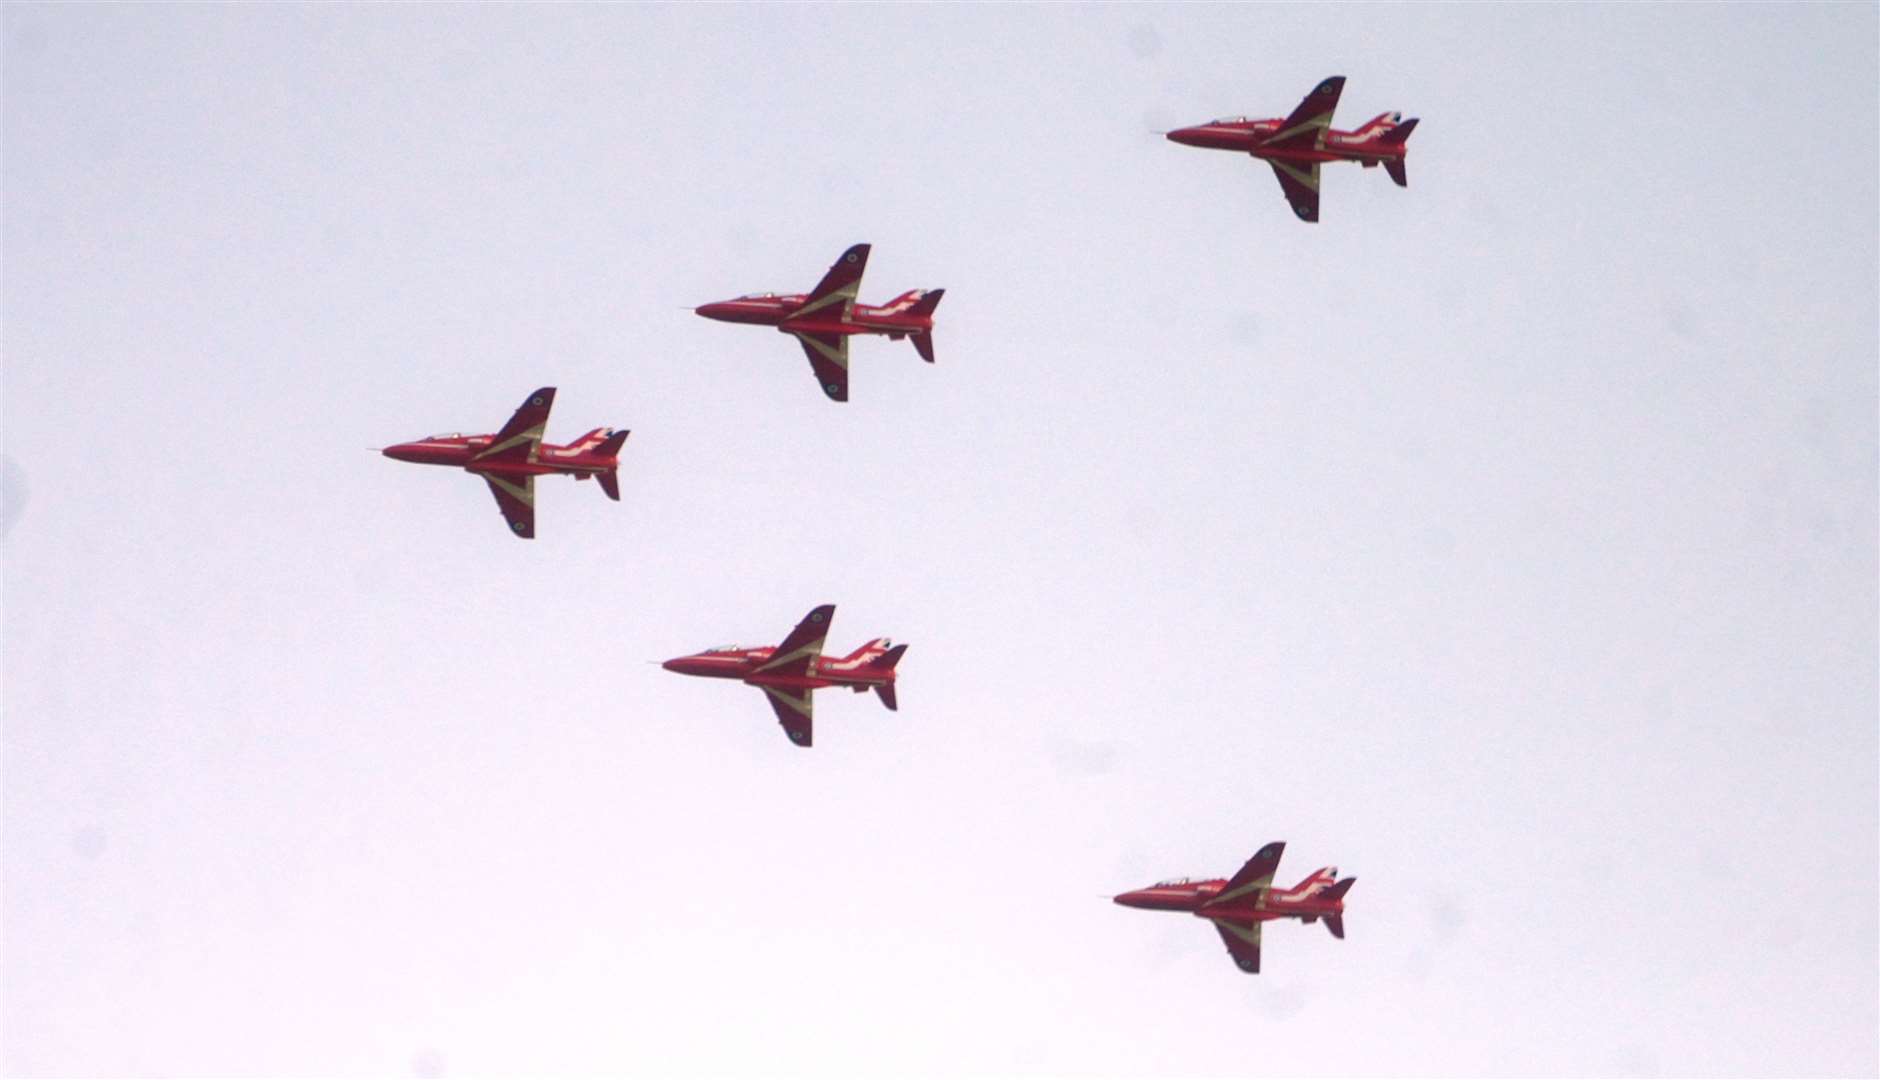 The Red Arrows flying over Walpole St Peter last month. Picture: Adam Fairbrother